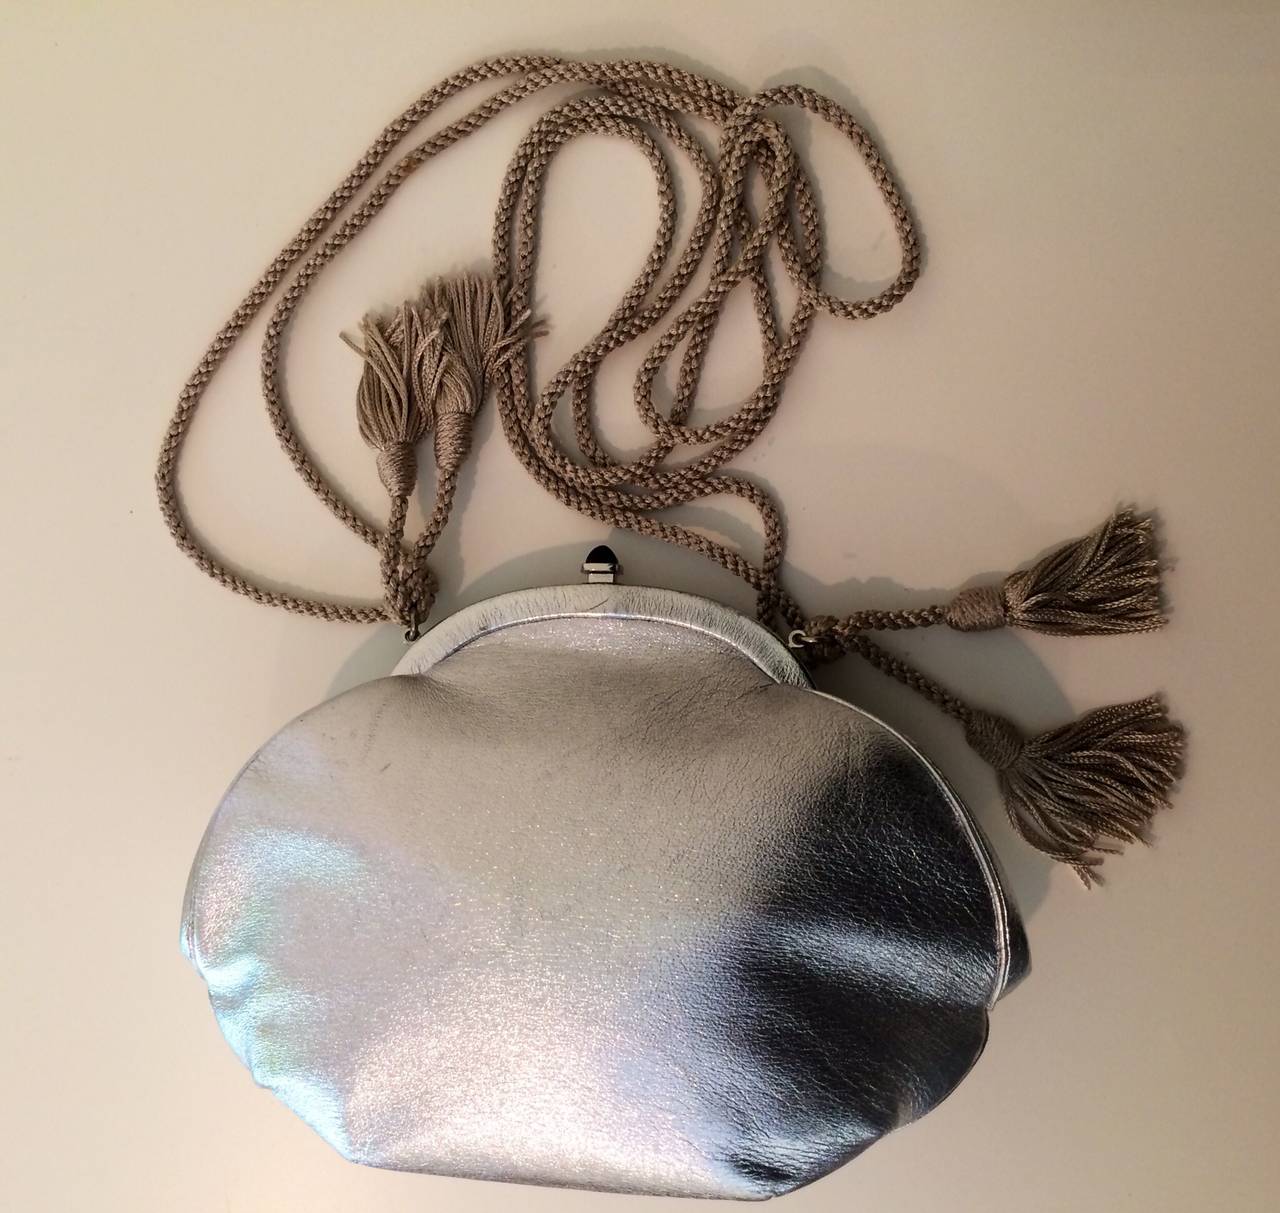 A vintage Judith Leiber silver metallic leather evening bag. Black onyx stone clasp. Silk cord strap with tassels. Strap can be tucked inside and used as a clutch. Comes with mirror and coin purse. Lined in satin.
Excellent